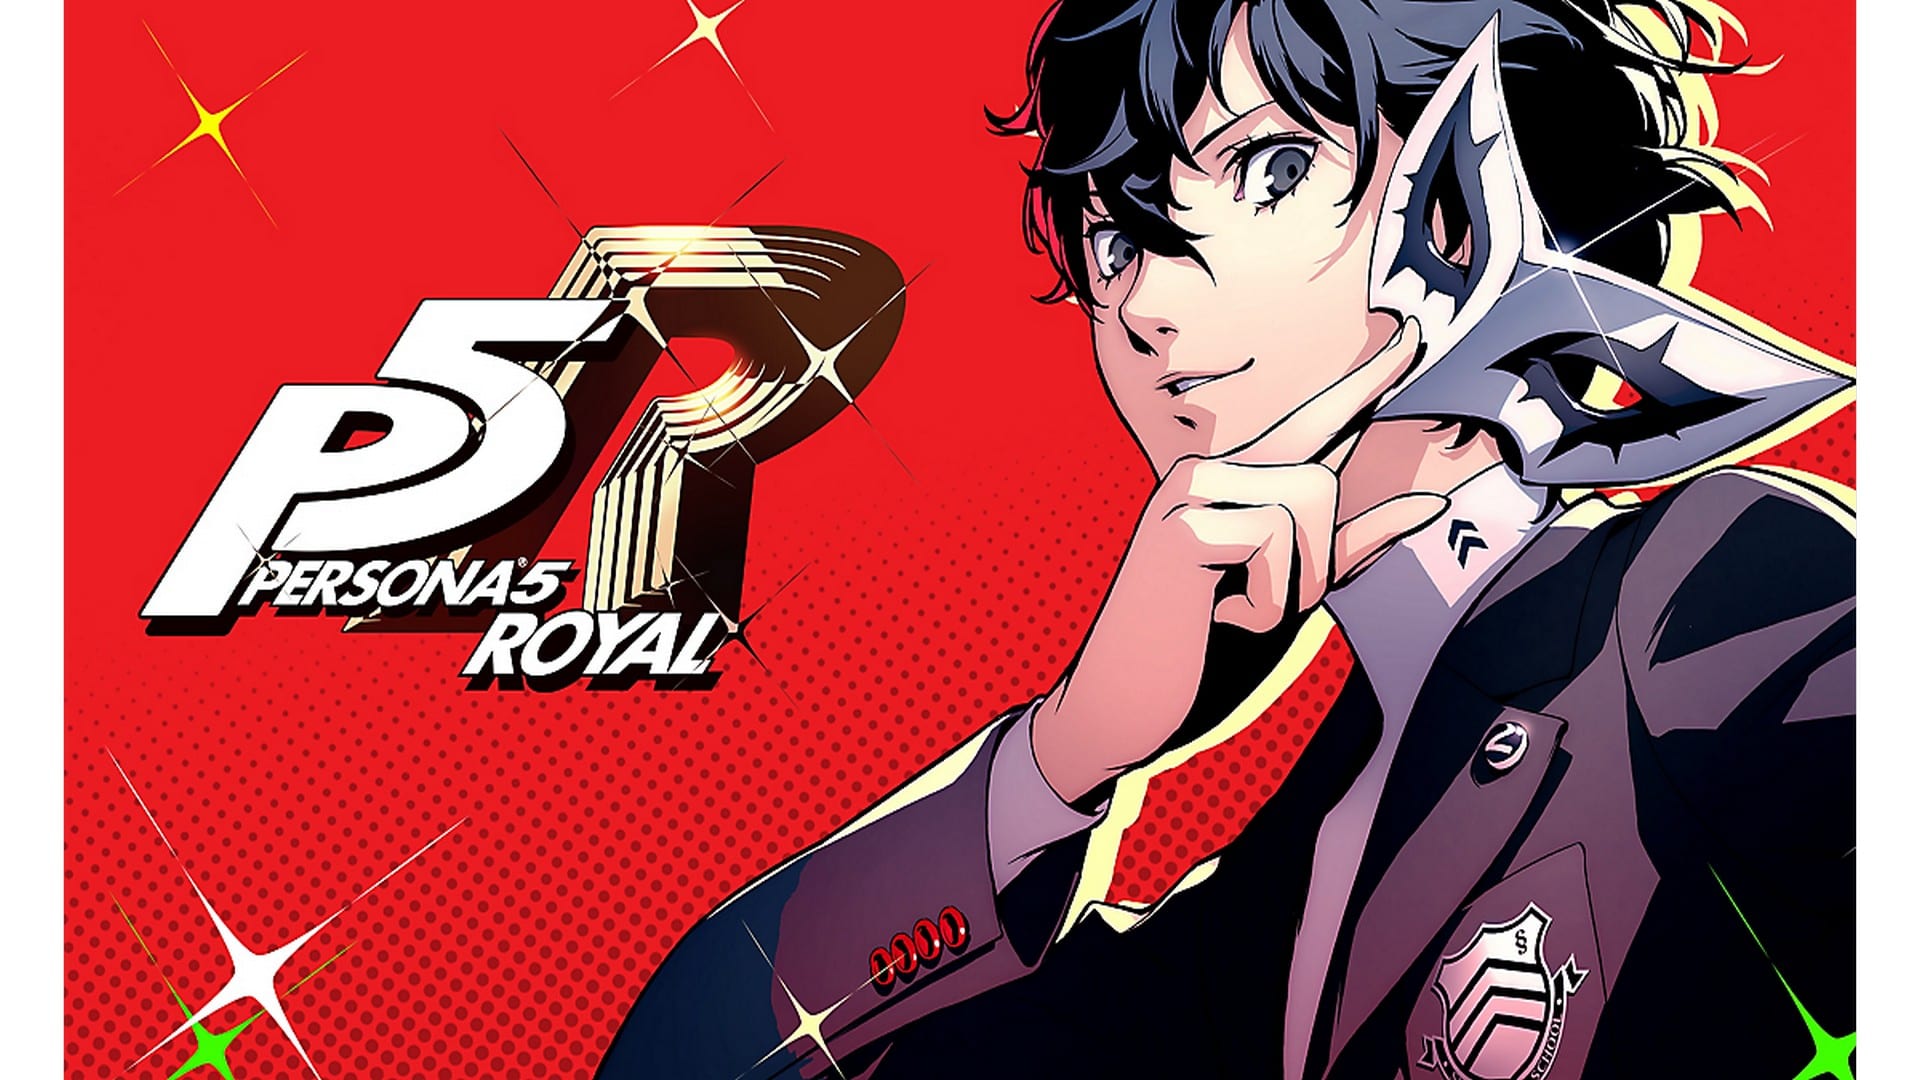 Critically Acclaimed Persona 5 Royal Is Out Now